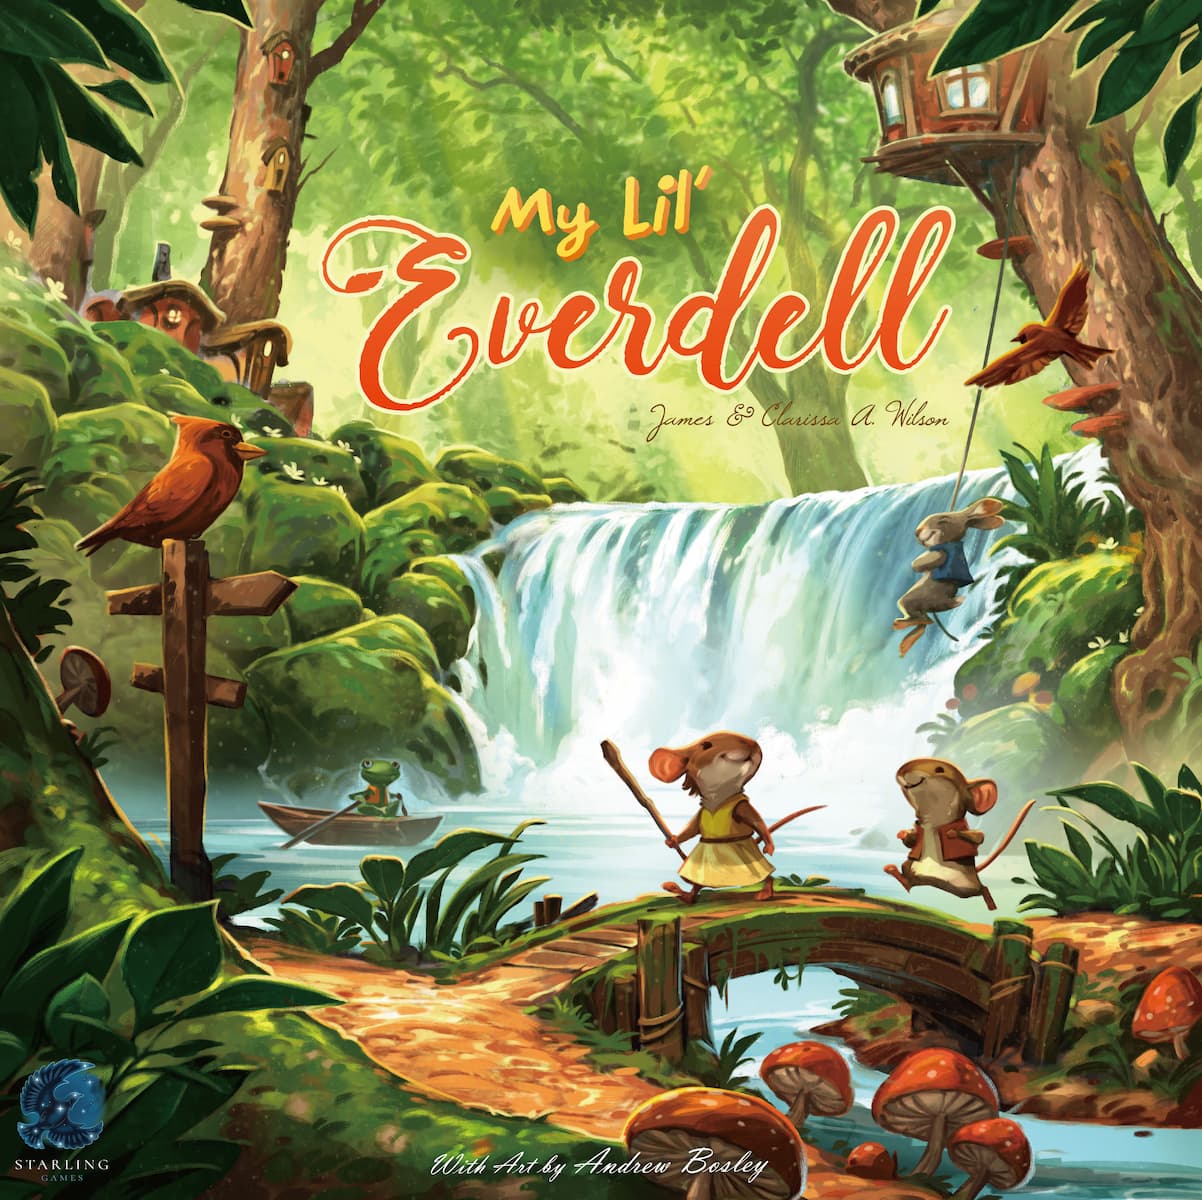 My Lil' Everdellthe board game was manufactured by Boda Games Manufacturing.